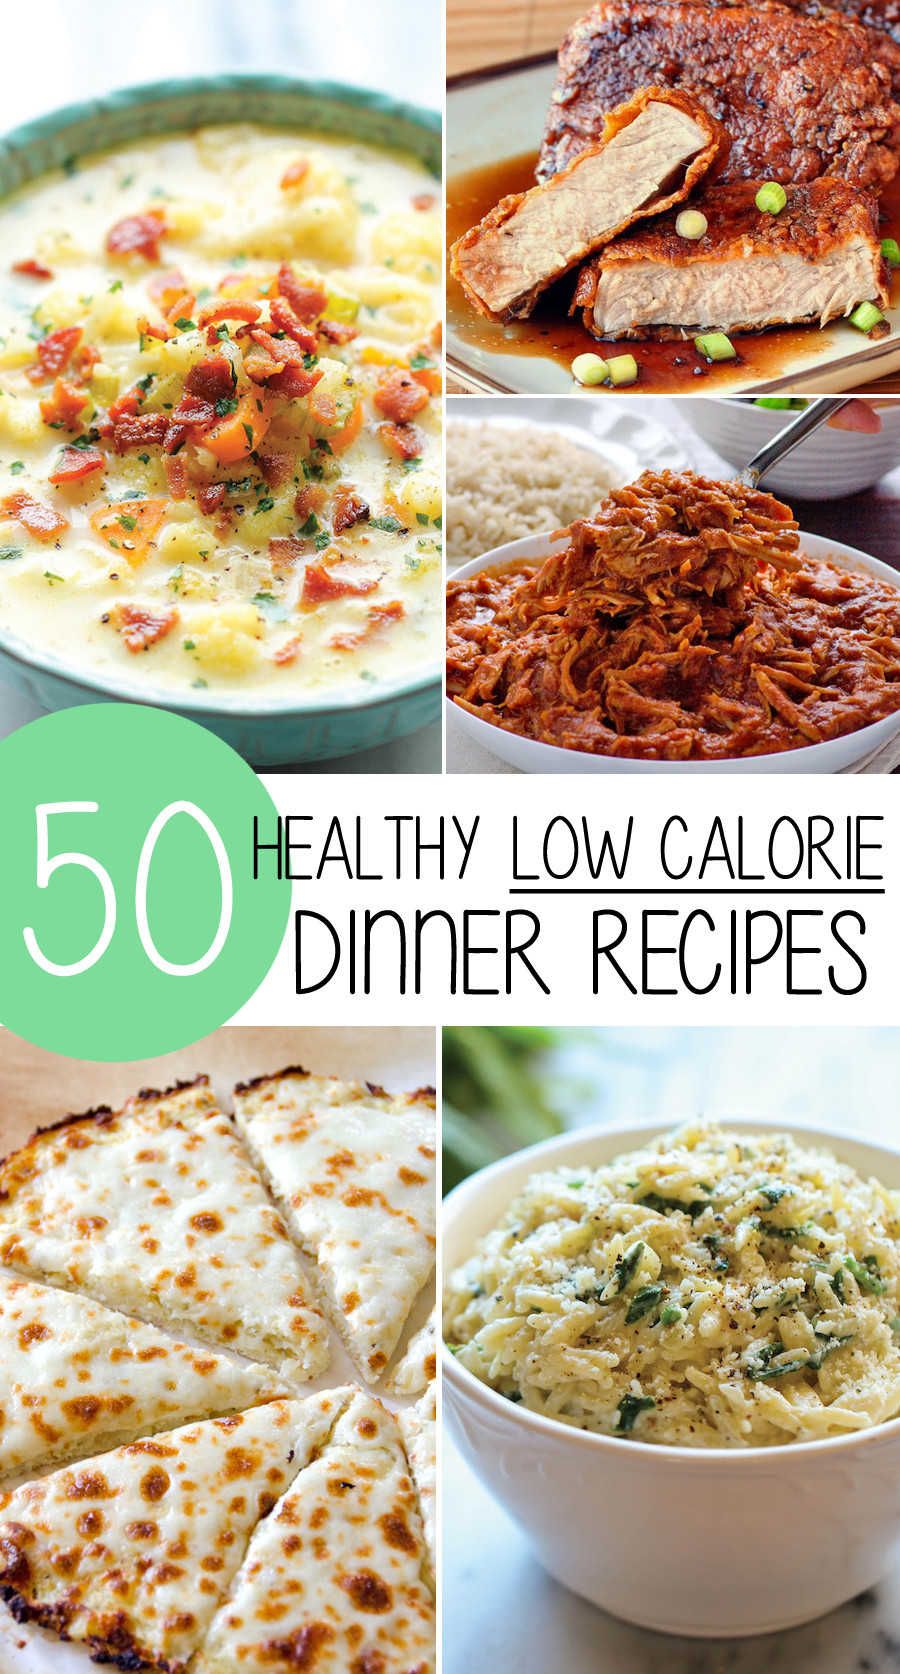 Low Calorie Lunch Recipes For Weight Loss
 50 Healthy Low Calorie Weight Loss Dinner Recipes